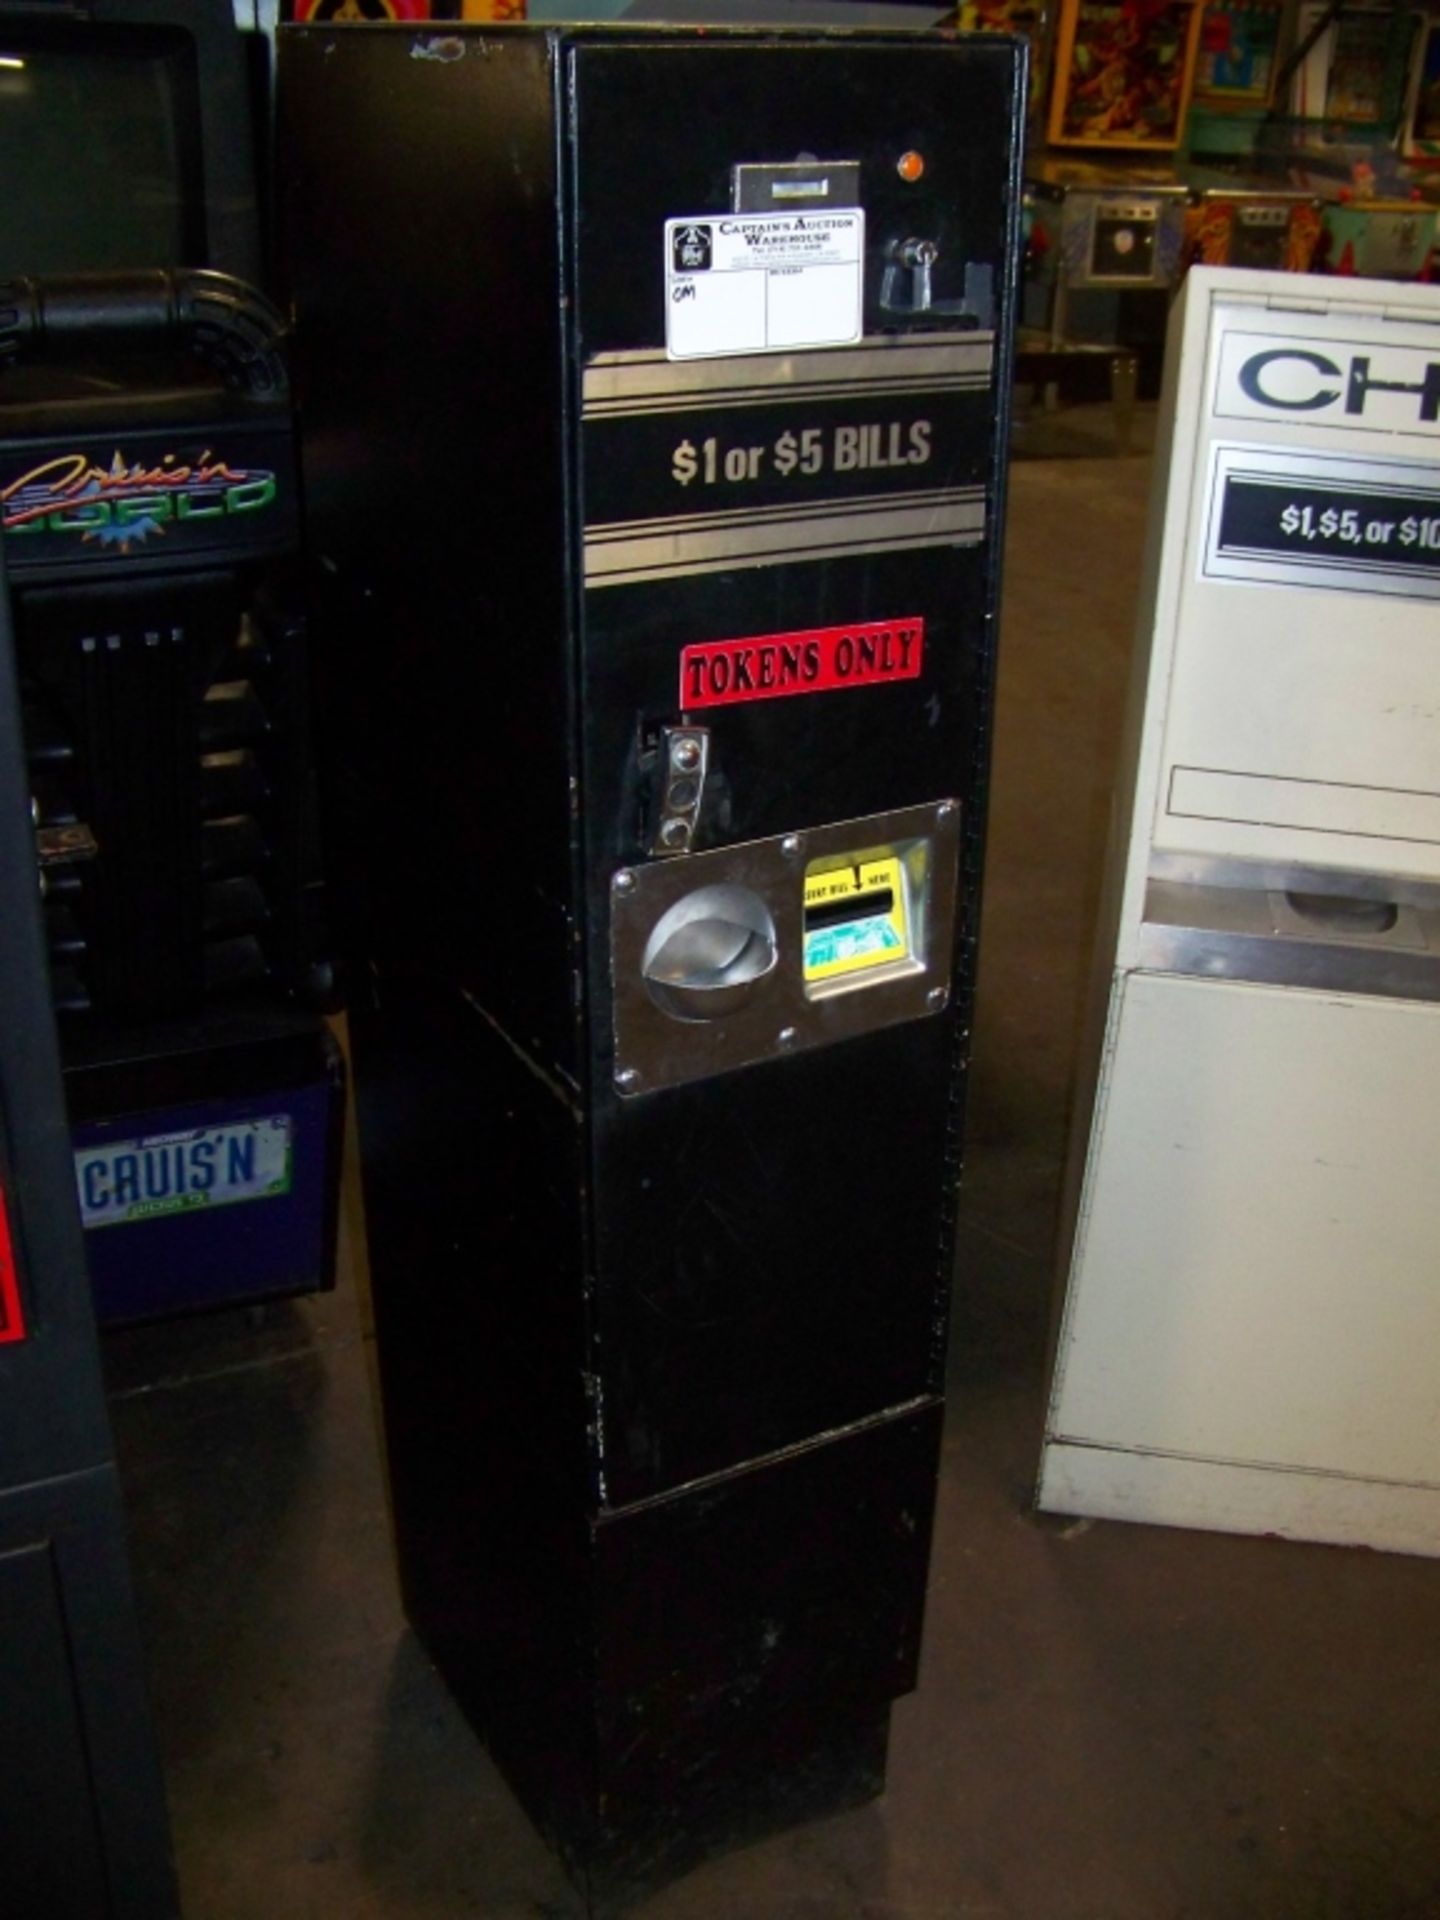 ROWE BC-12 DOLLAR COIN CHANGER MACHINE Item is in used condition. Evidence of wear and commercial